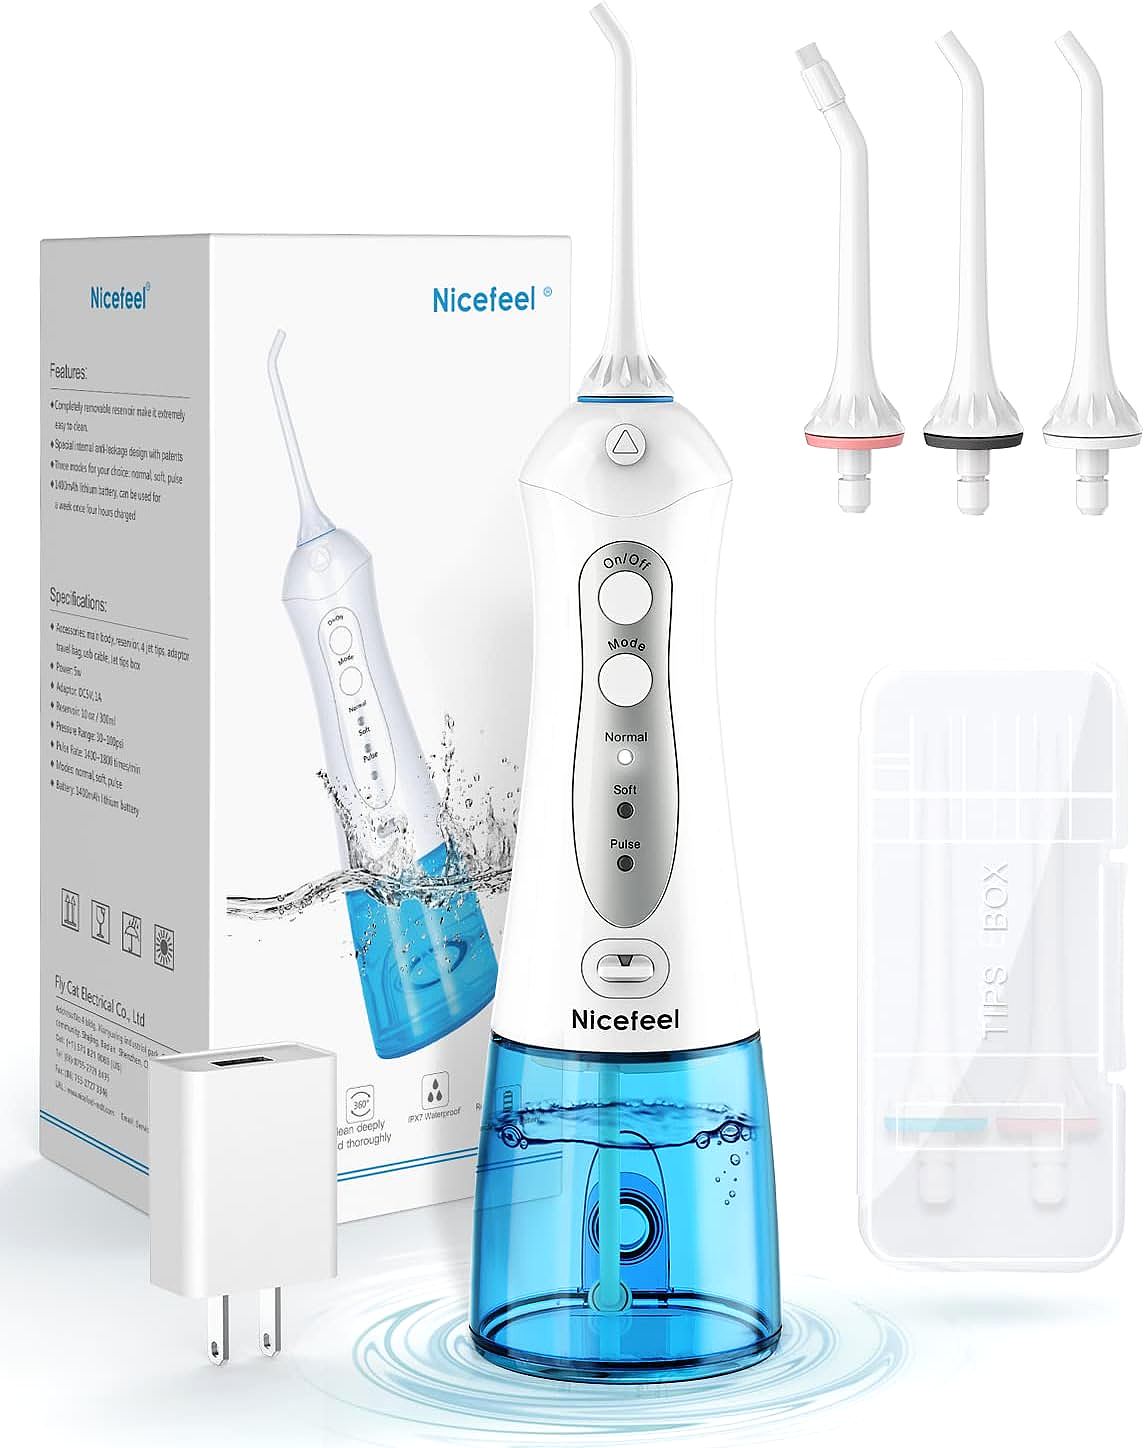 Nicefeel FC159 Cordless Water Flosser - A Powerful yet Portable Oral Irrigator